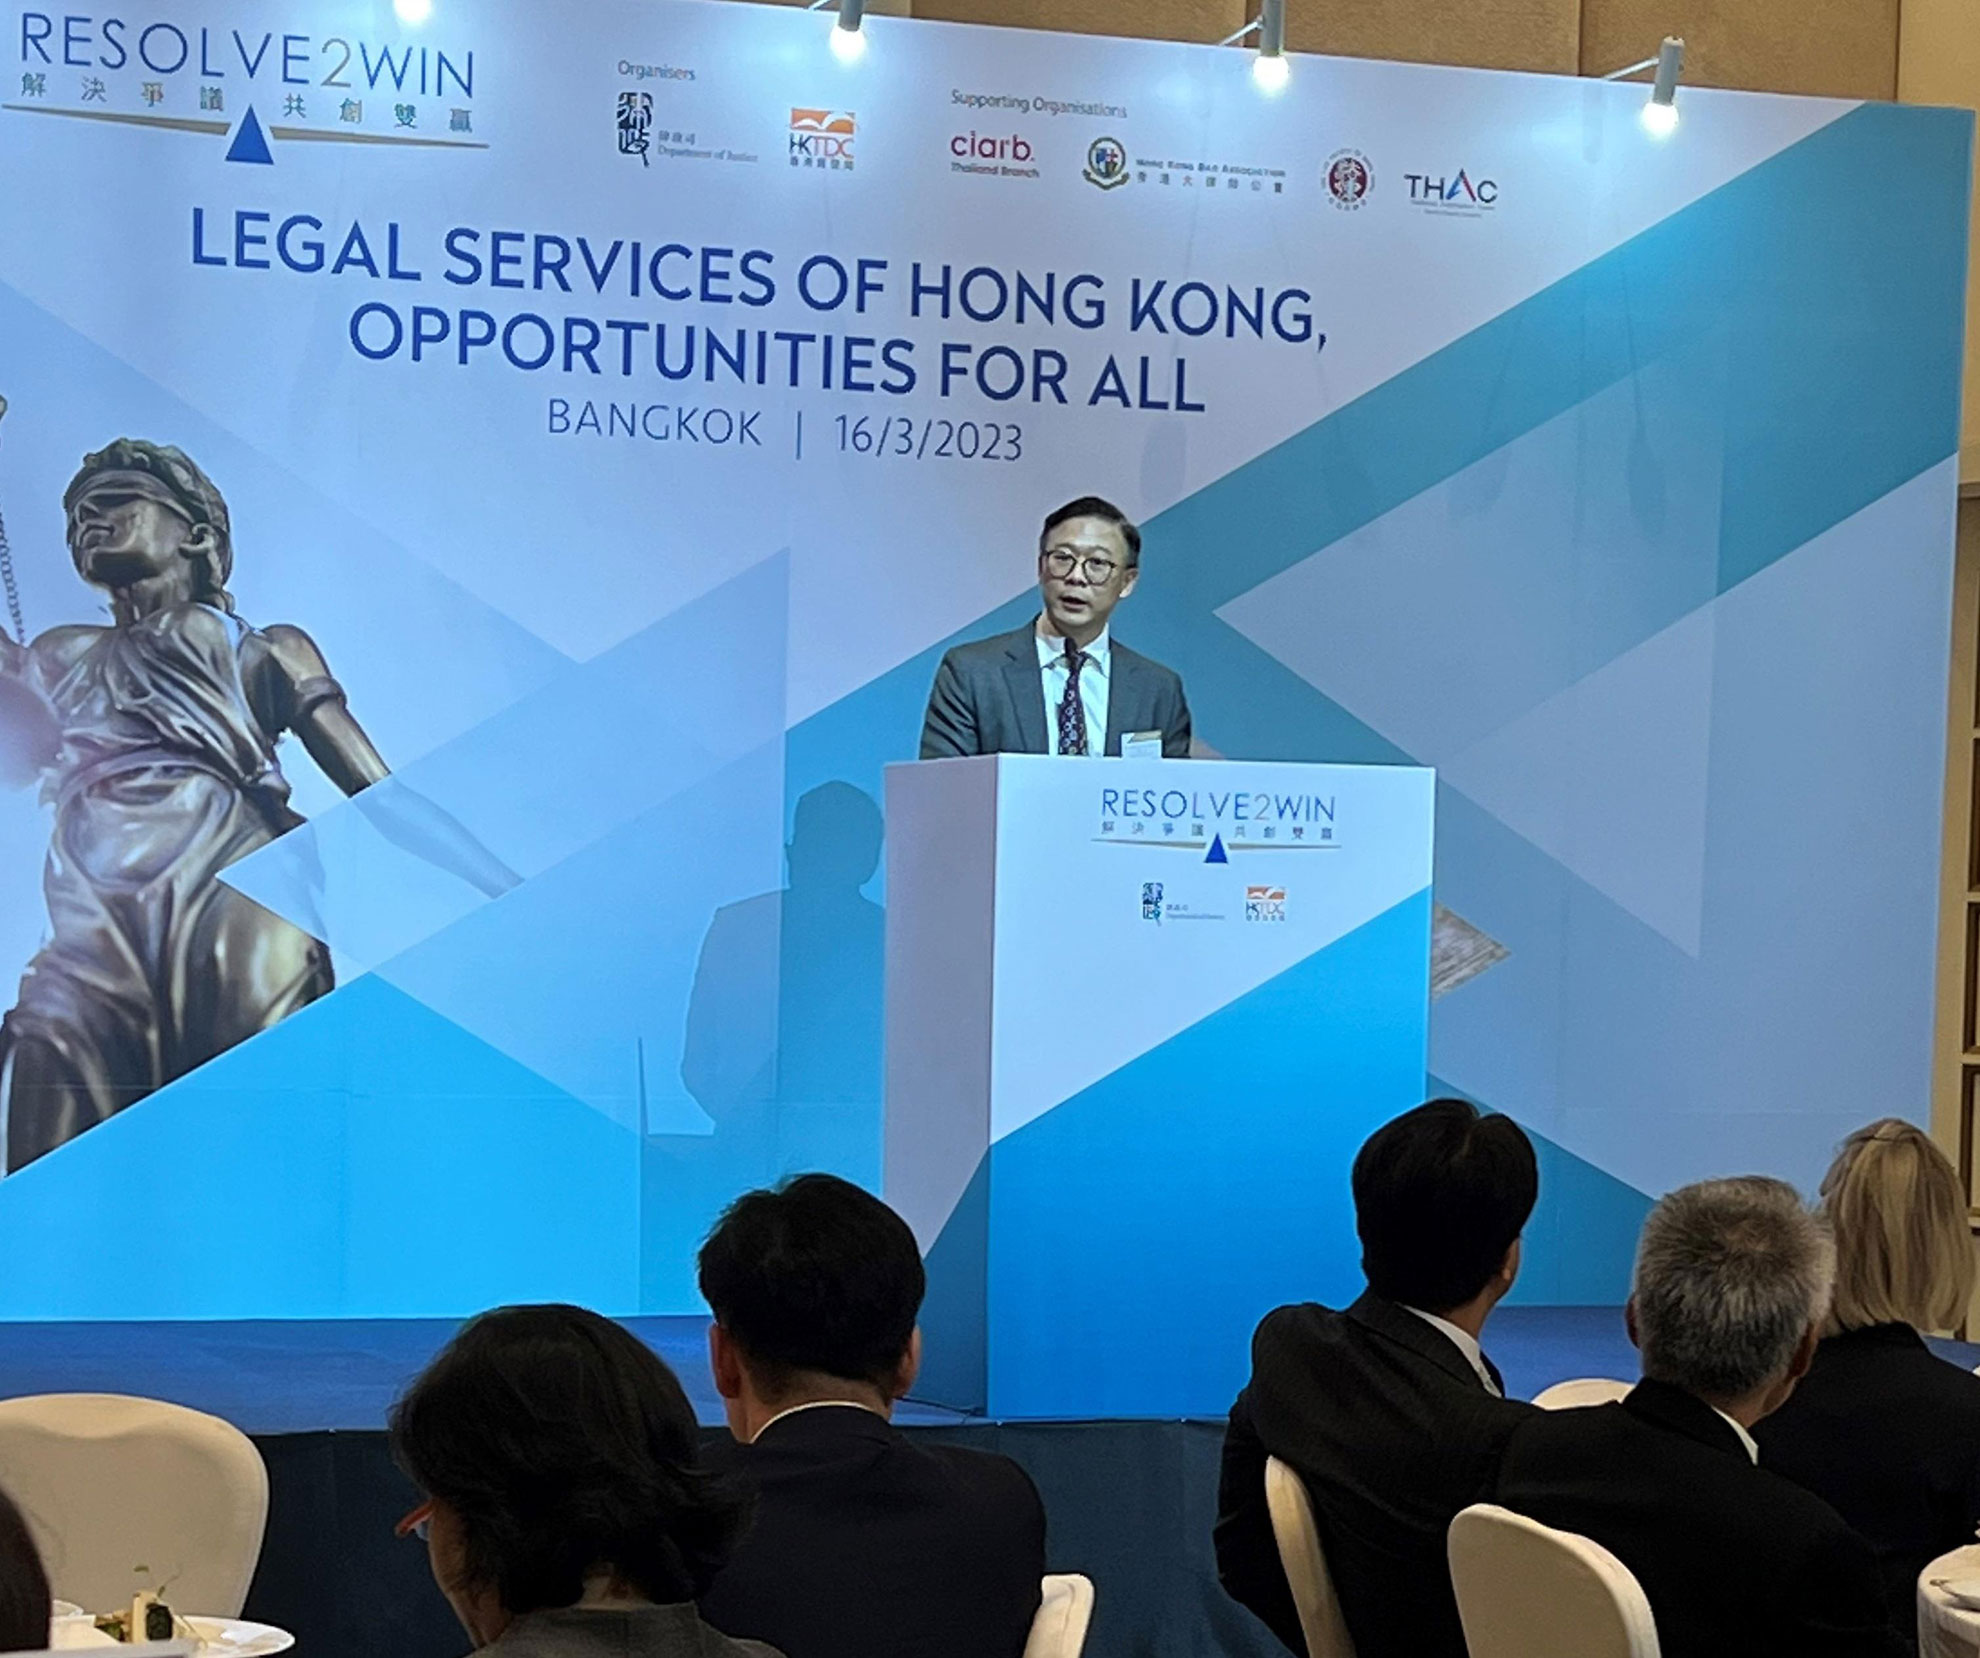 The Deputy Secretary for Justice, Mr Cheung Kwok-kwan, attended the “Resolve2Win - Legal Services of Hong Kong, Opportunities for All”, an international promotional campaign co-organised by the Department of Justice and the Hong Kong Trade Development Council, in Bangkok, Thailand, today (March 16). Photo shows Mr Cheung delivering his keynote speech at the event's luncheon.